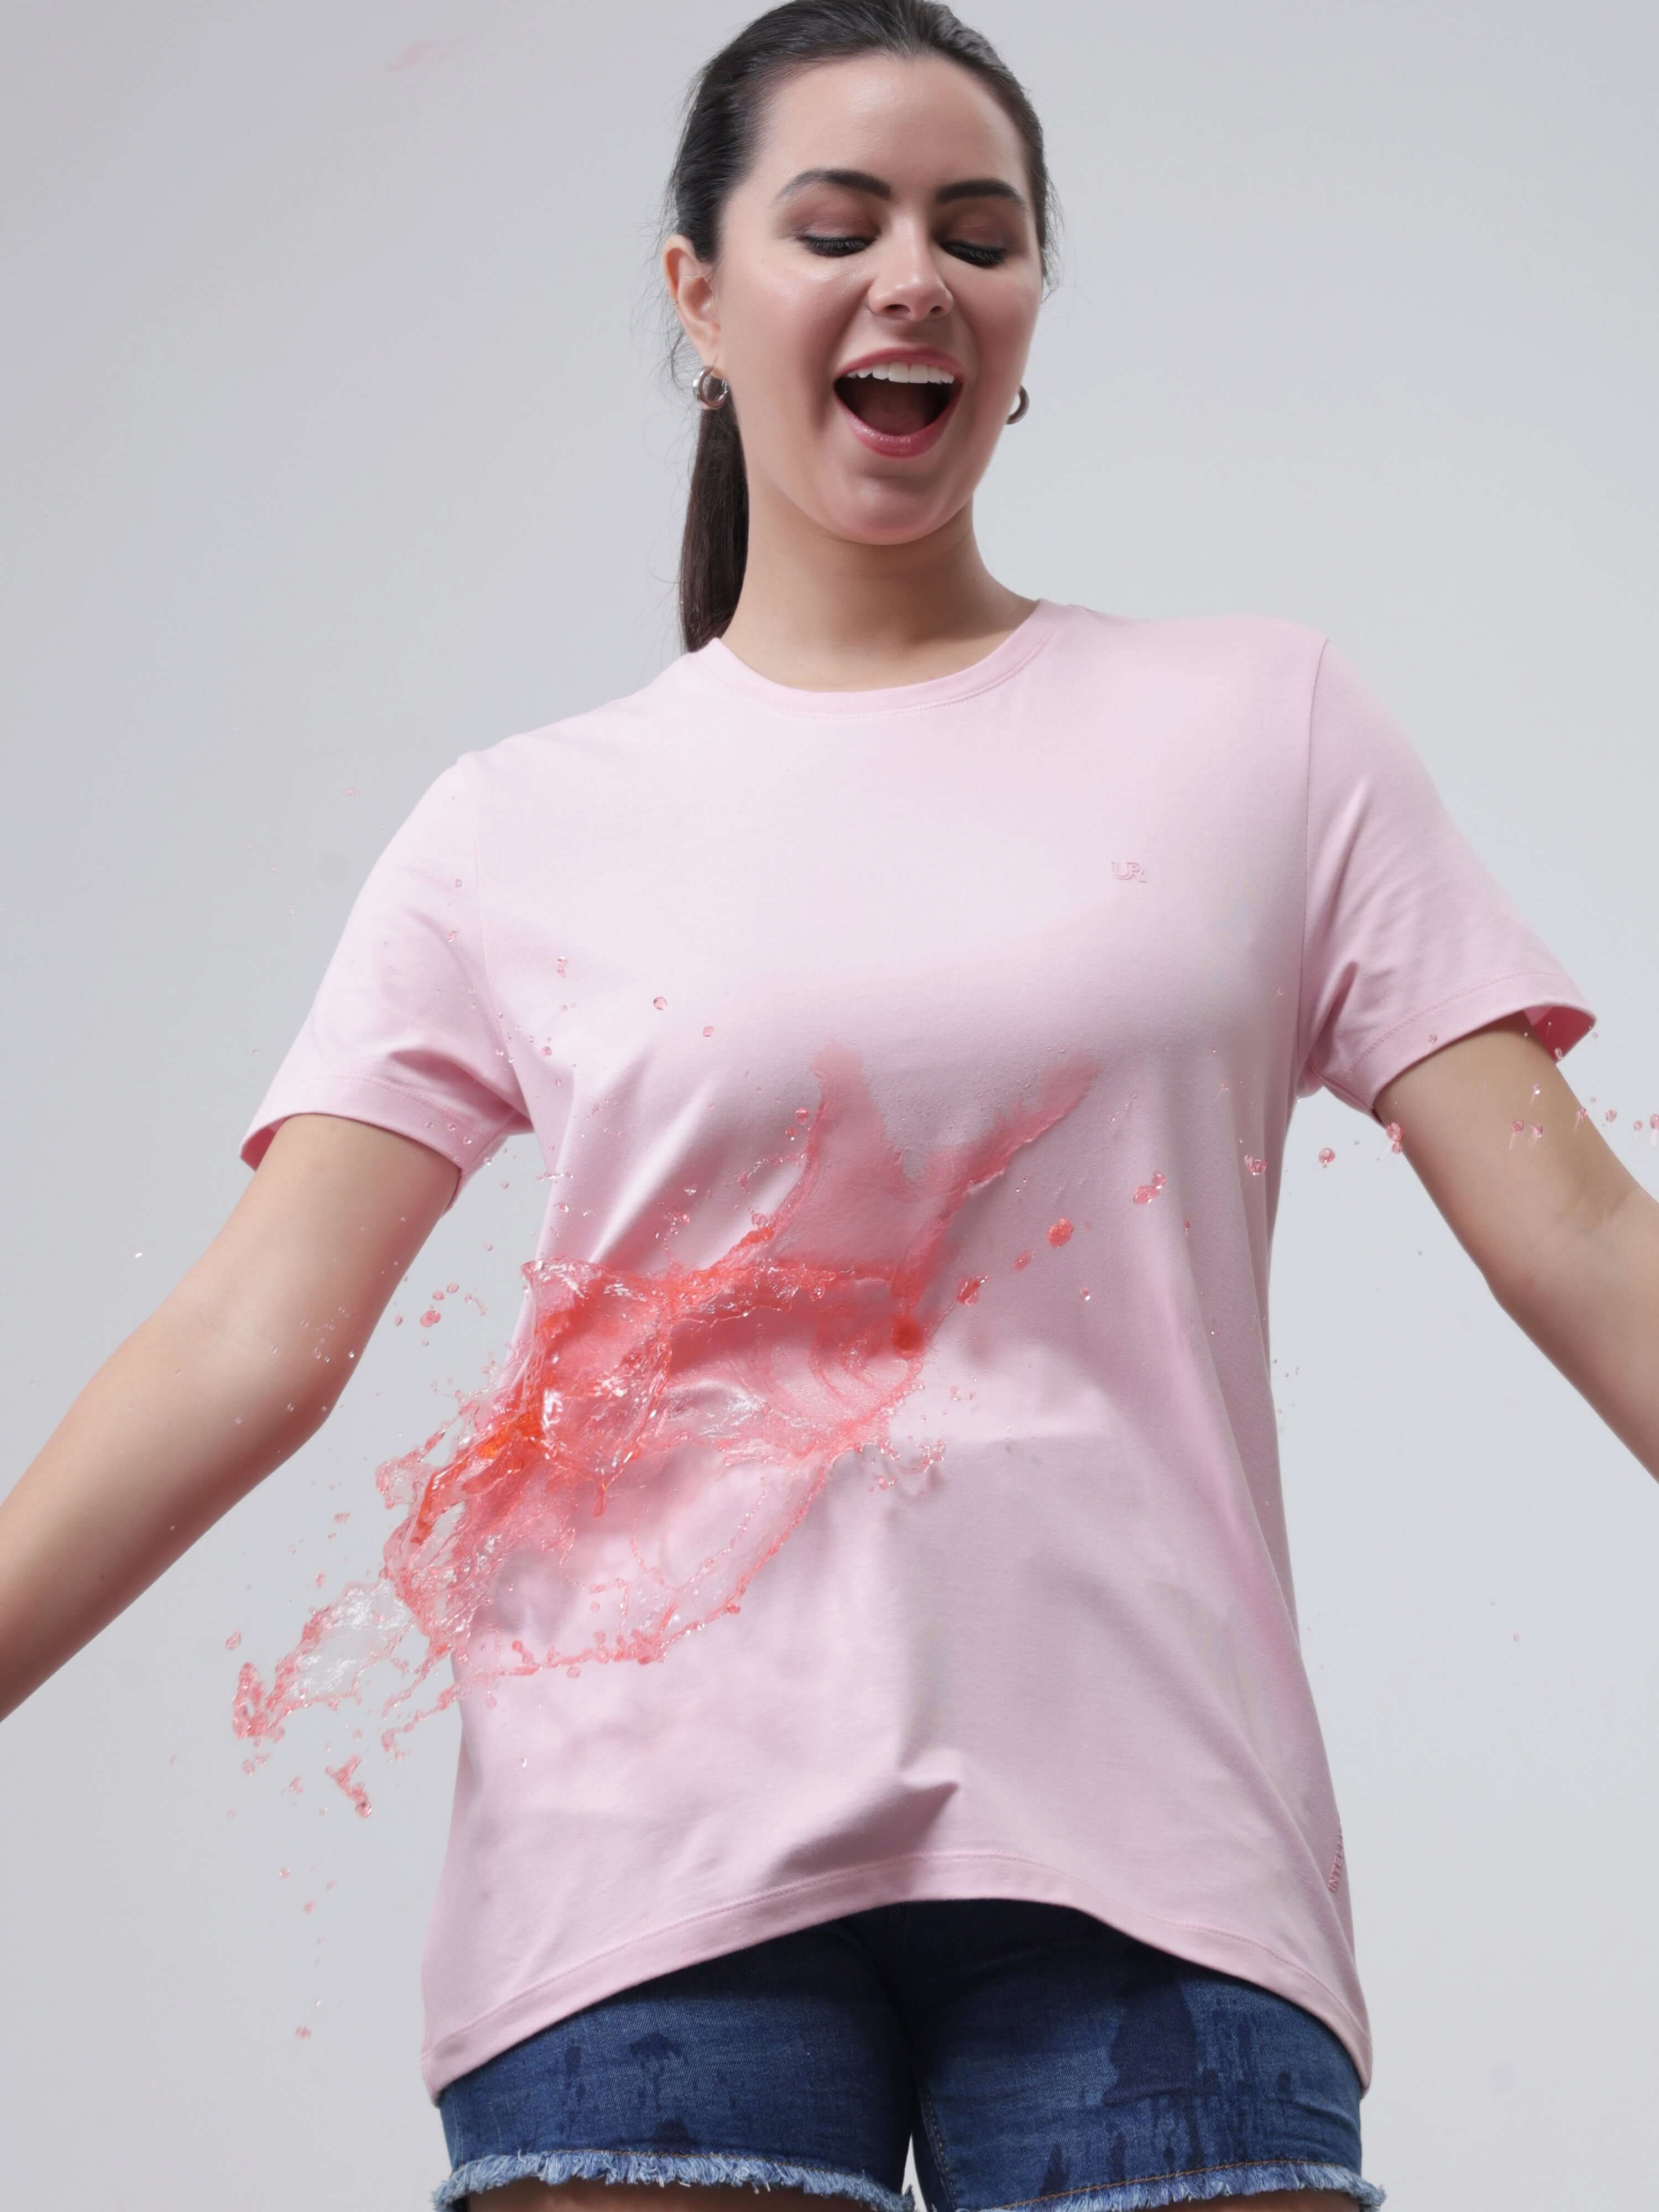 Woman wearing pink Turms Mystic Orchid T-shirt with stain-repellent and anti-odor technology, demonstrating spill resistance.